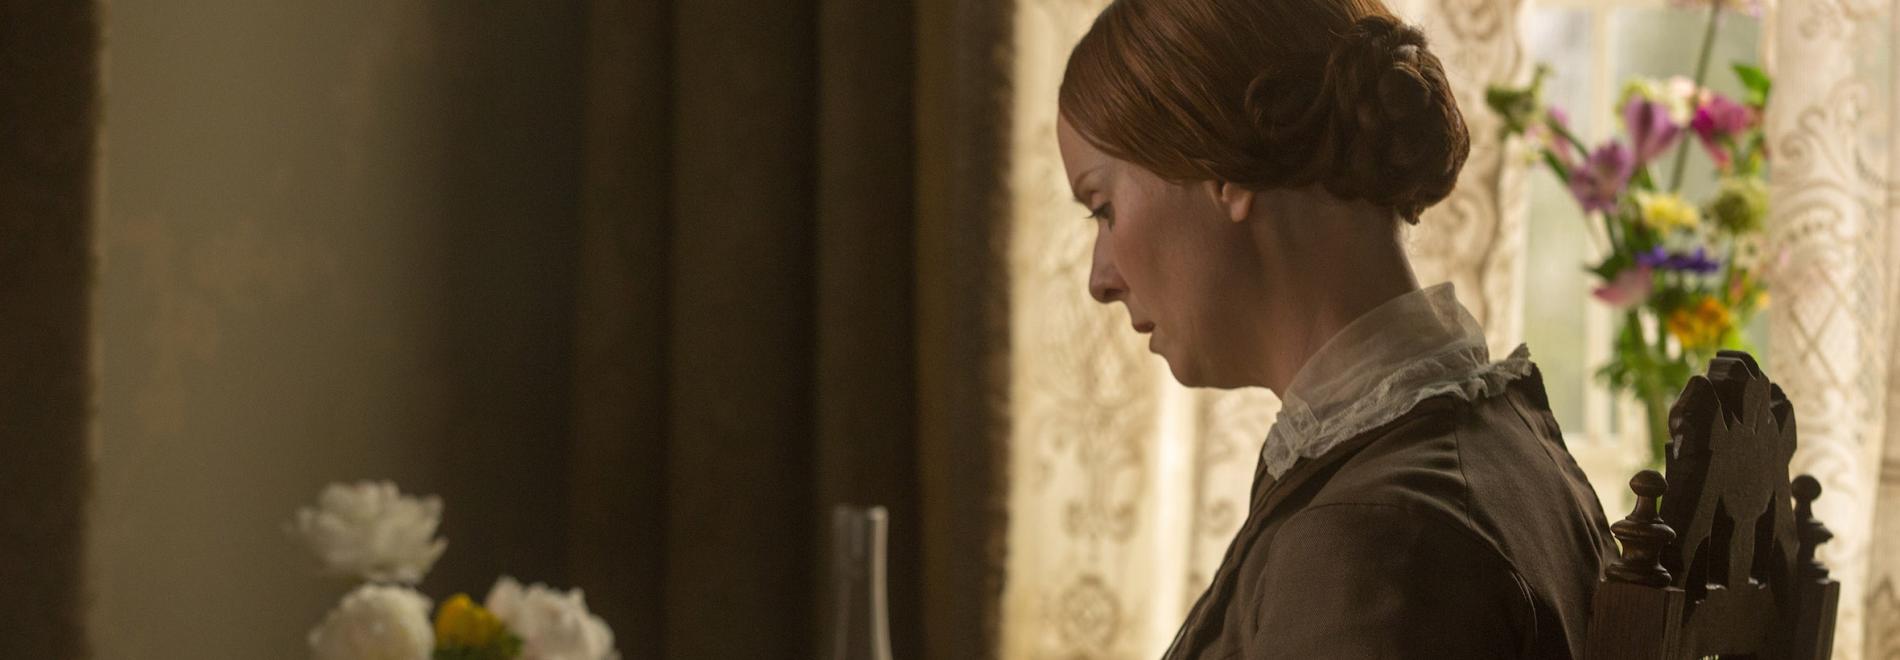 A Quiet Passion (Terence Davies, 2016)